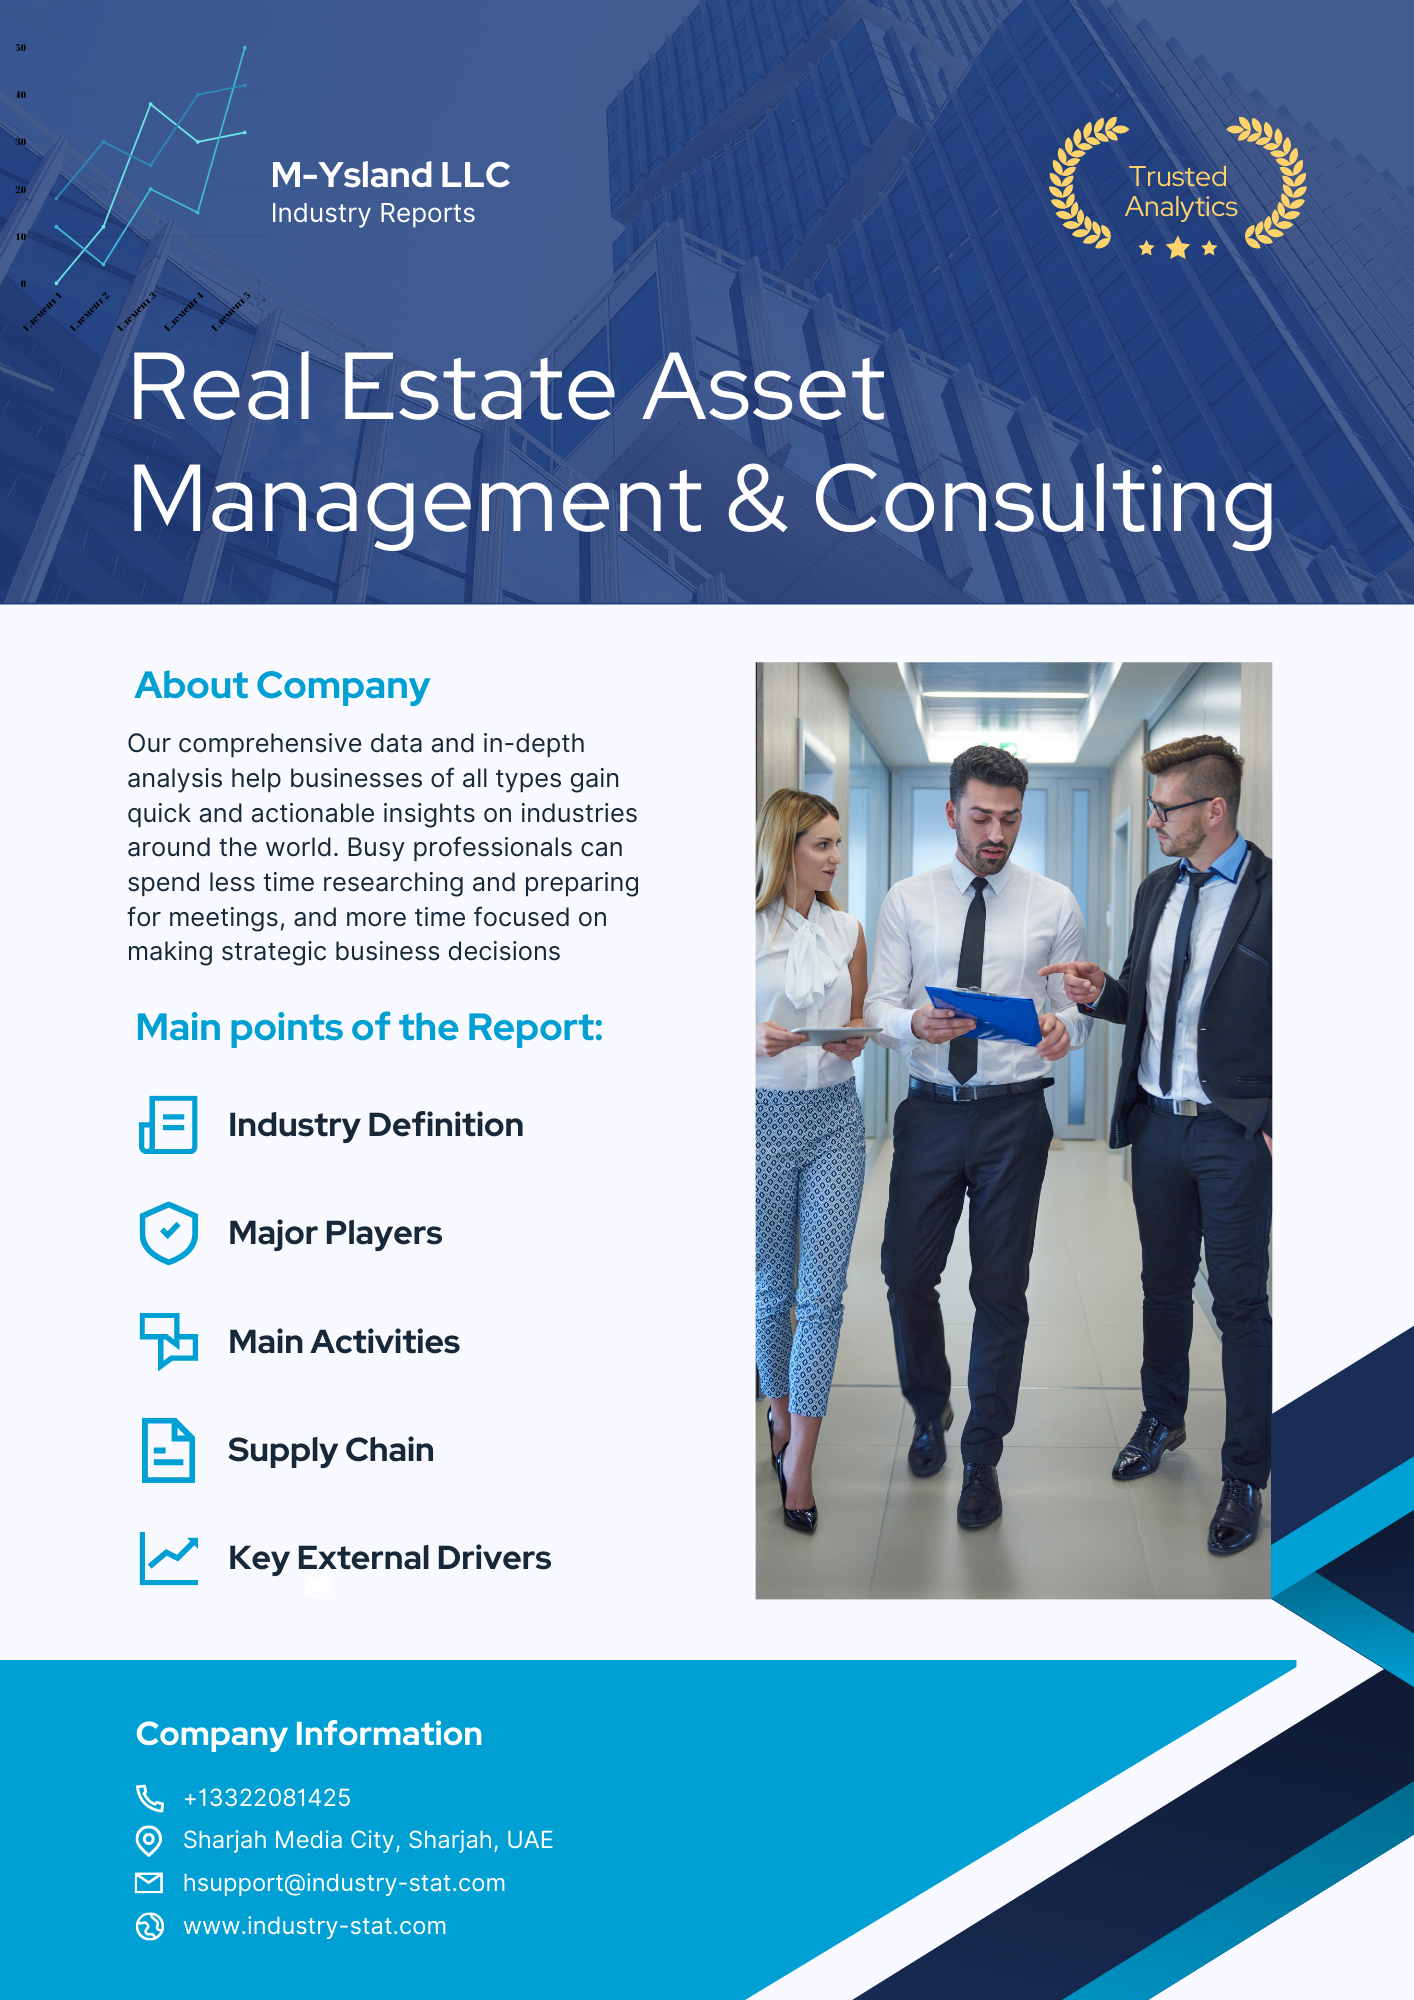 Real Estate Asset Management & Consulting